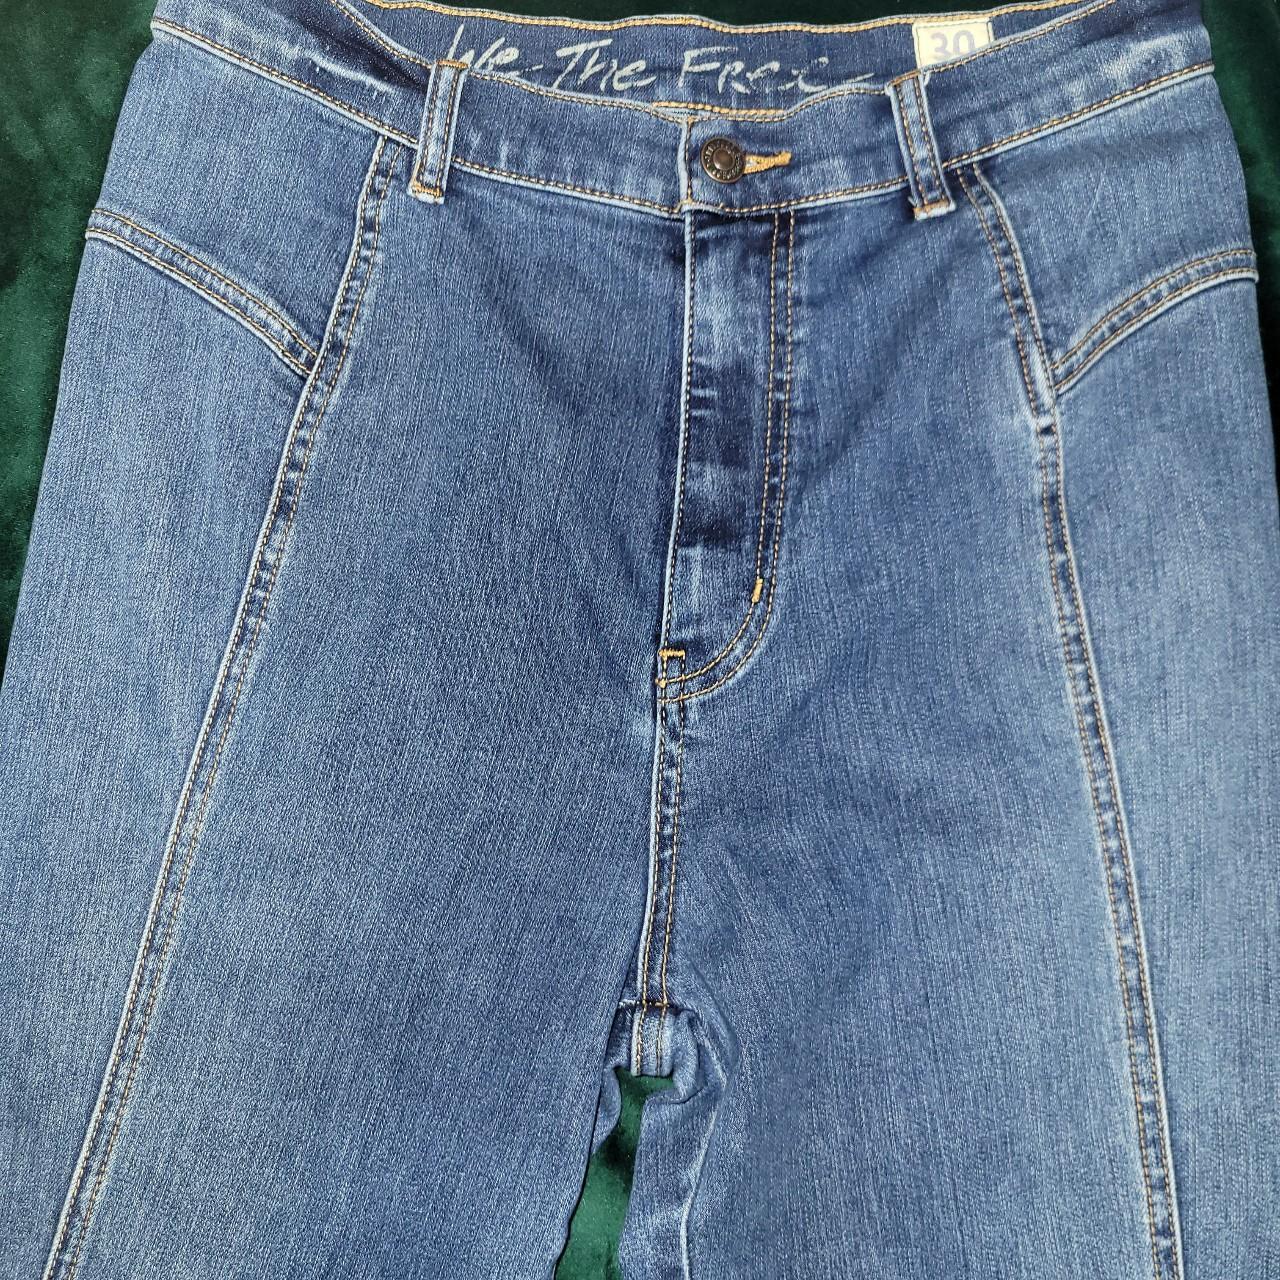 Whiplash high waisted skinny jean! Lots of stretch - Depop